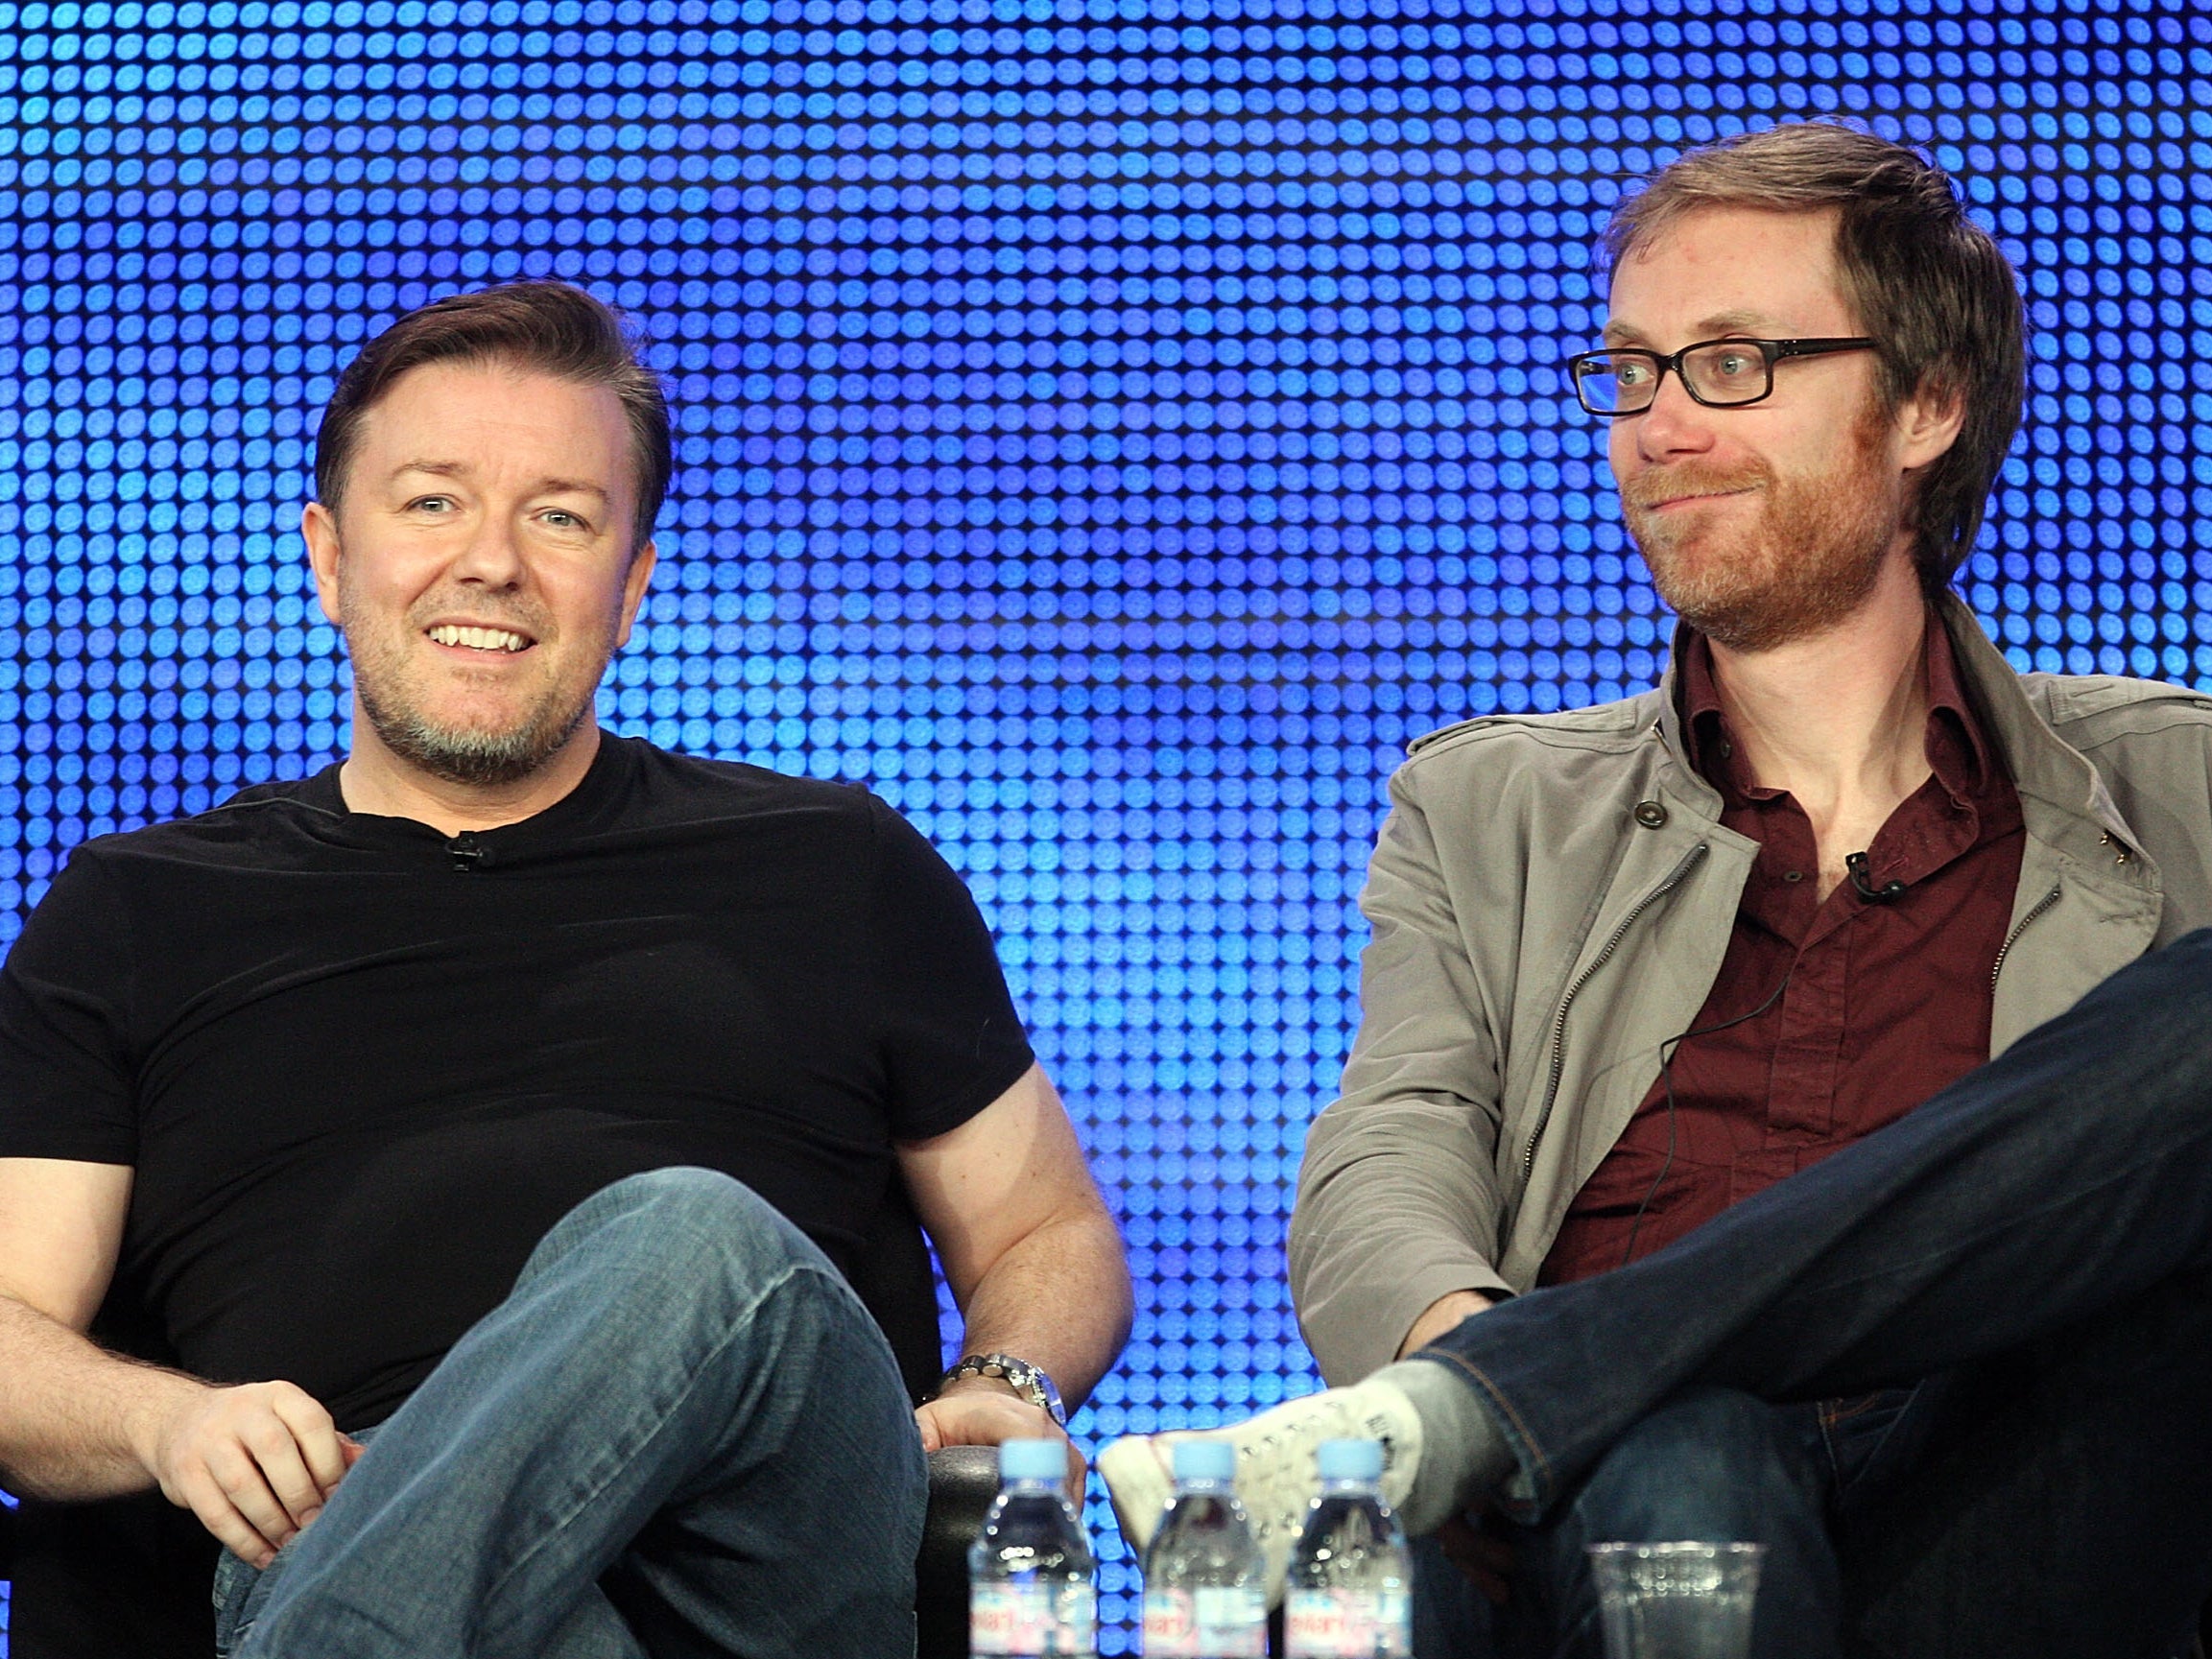 Ricky Gervais and Stephen Merchant have forged their own career paths